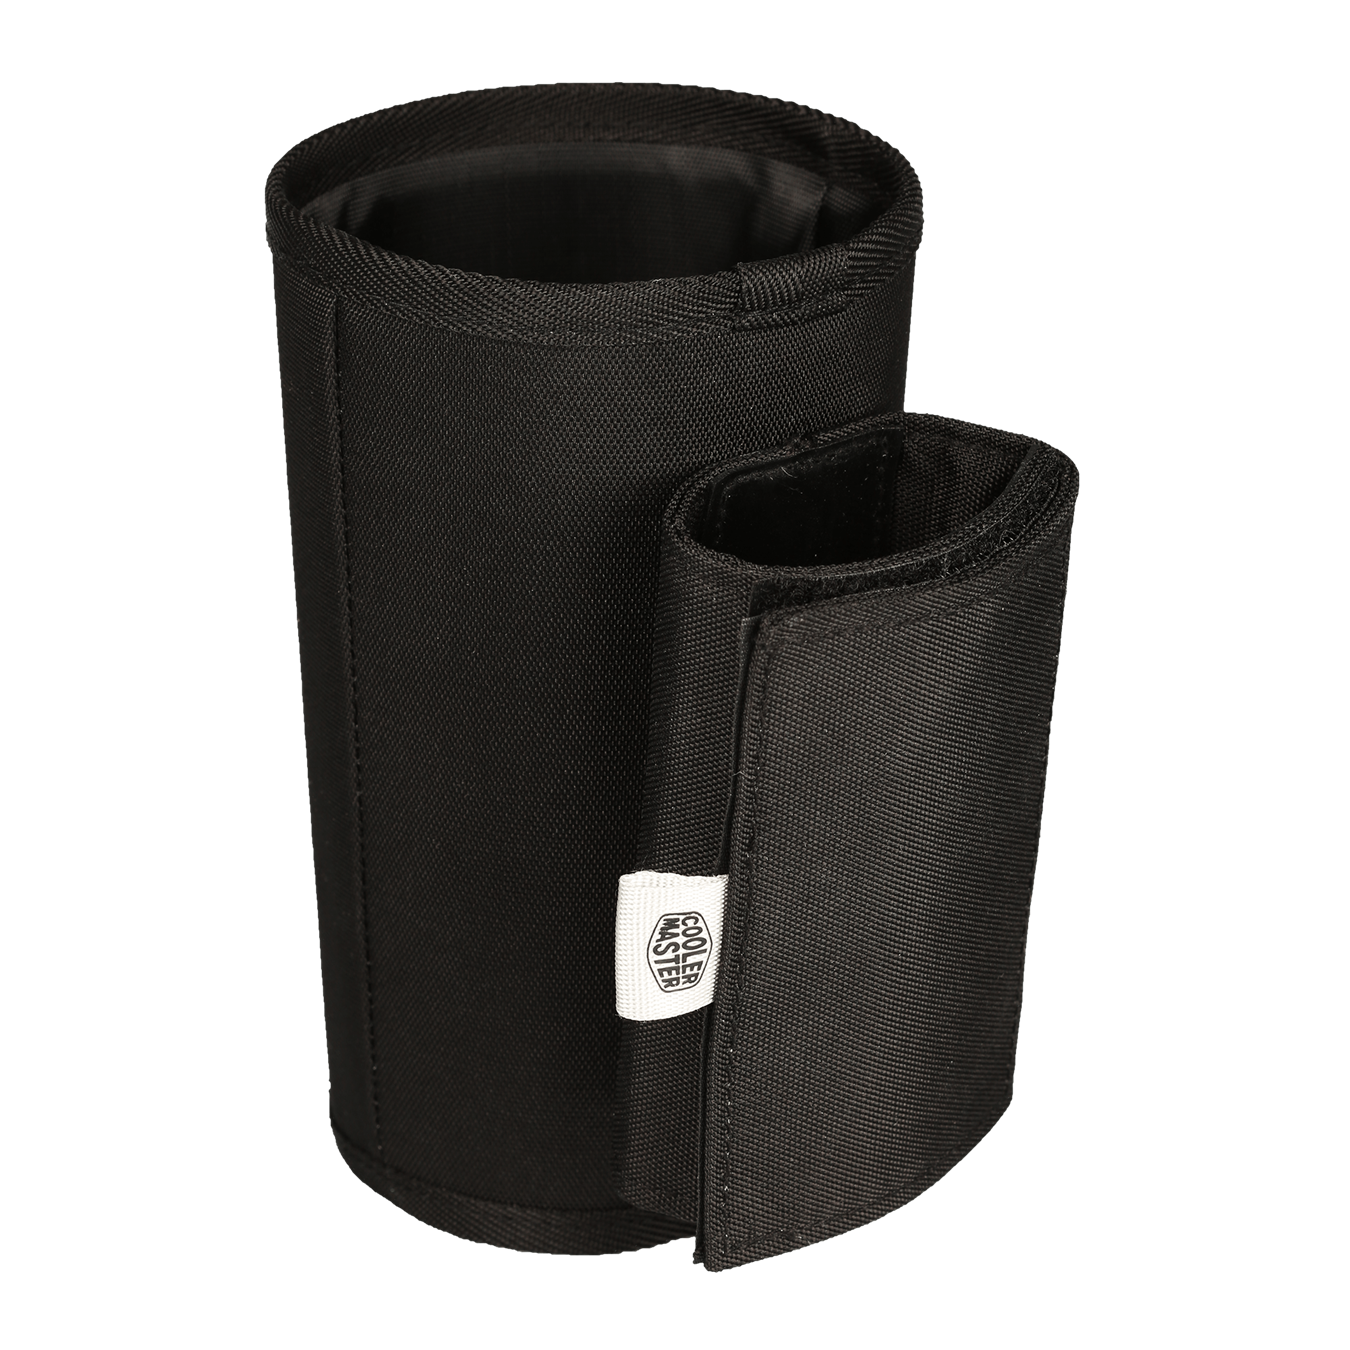 CH510 Cup Holder - Easy to clean and cold drinks compatible.